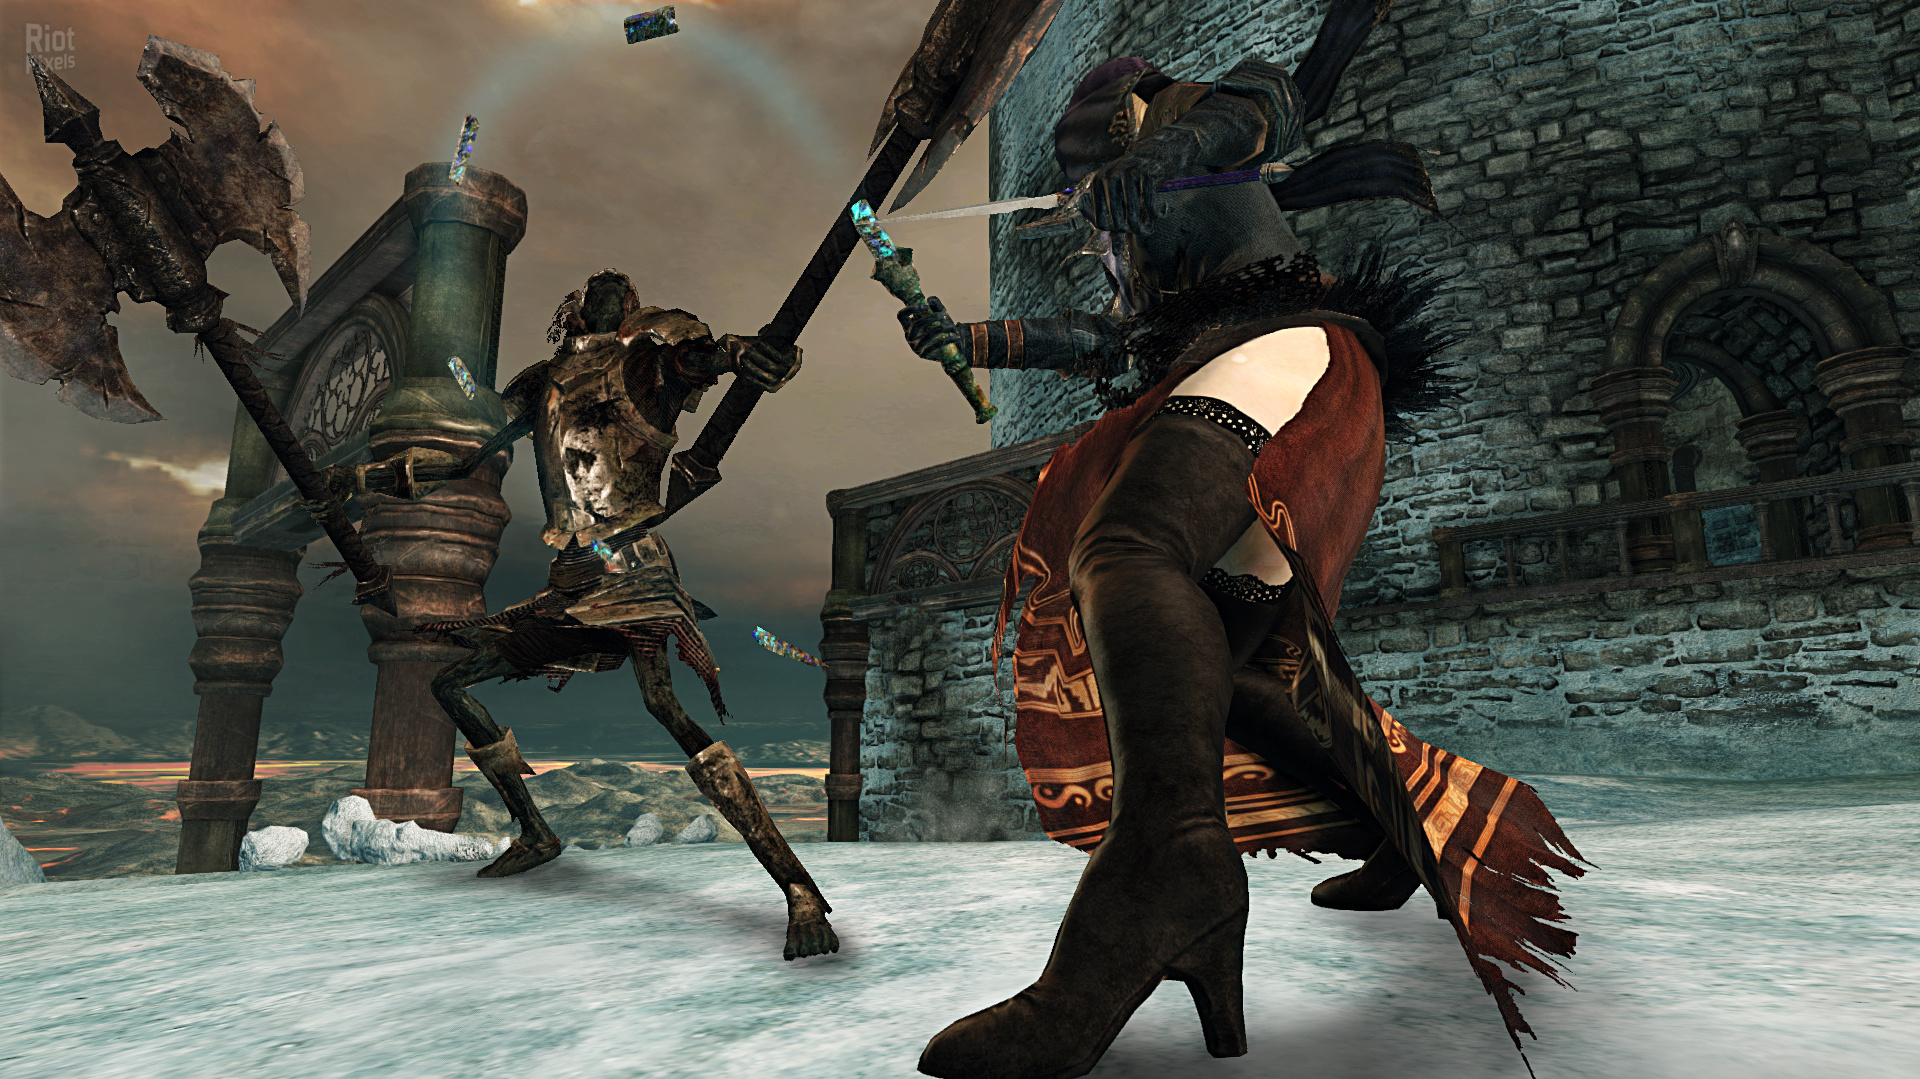 Dark Souls II: Scholar of the First Sin Launched with Art from RedHot —  RedHot